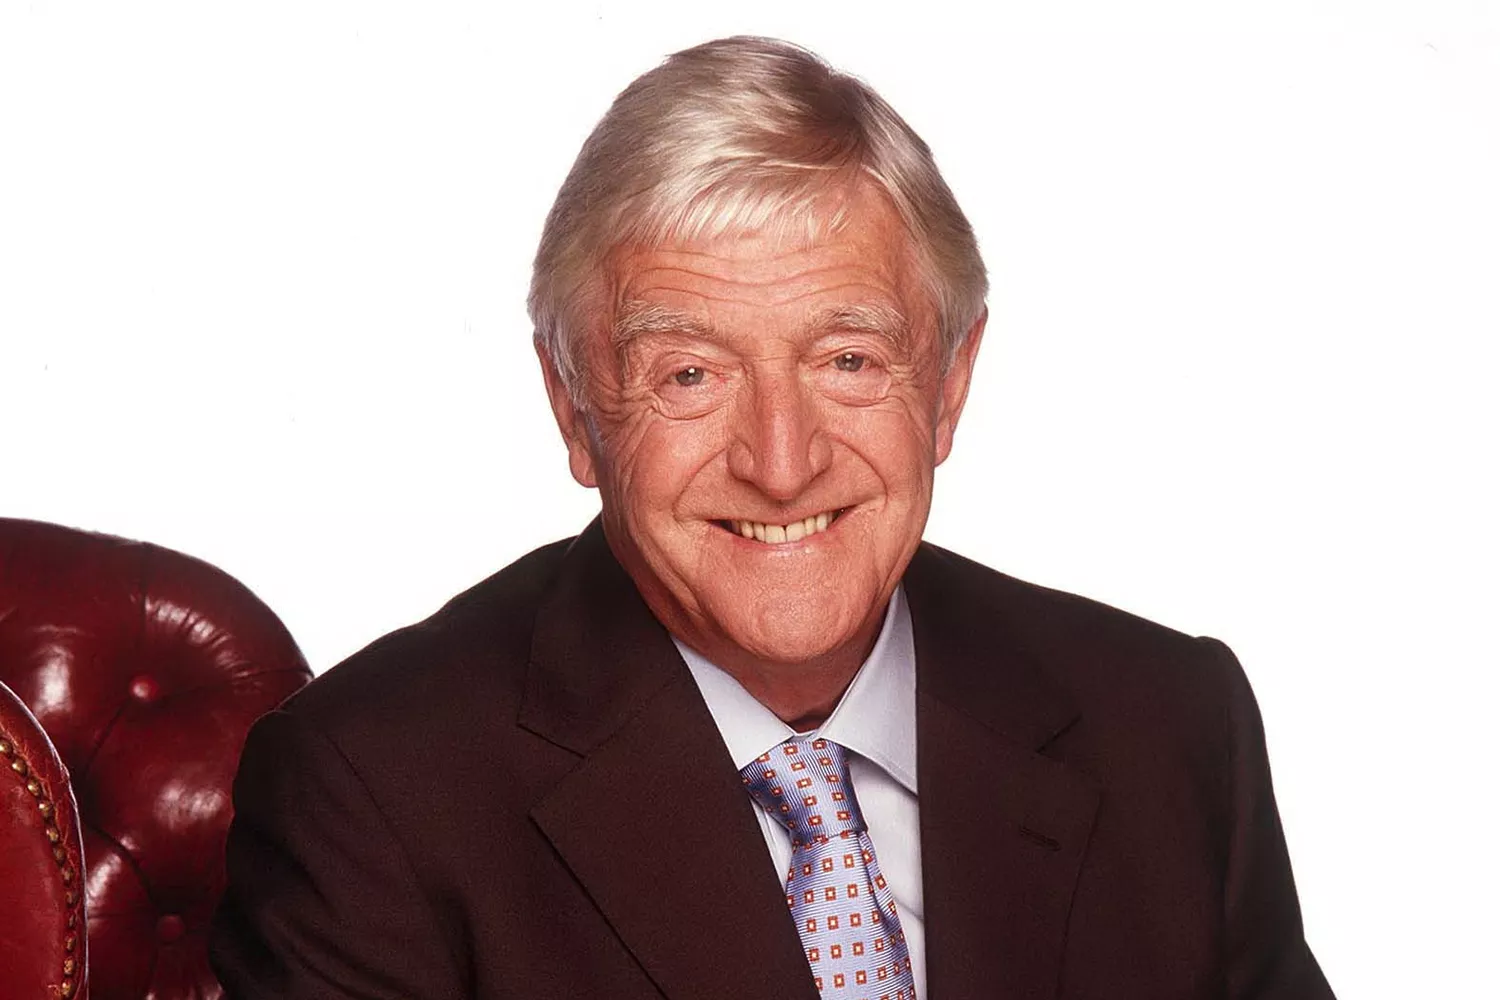 Michael Parkinson Dead 2005 8db1e9f5c35645f0acc79efc19561368 - WTX News Breaking News, fashion & Culture from around the World - Daily News Briefings -Finance, Business, Politics & Sports News